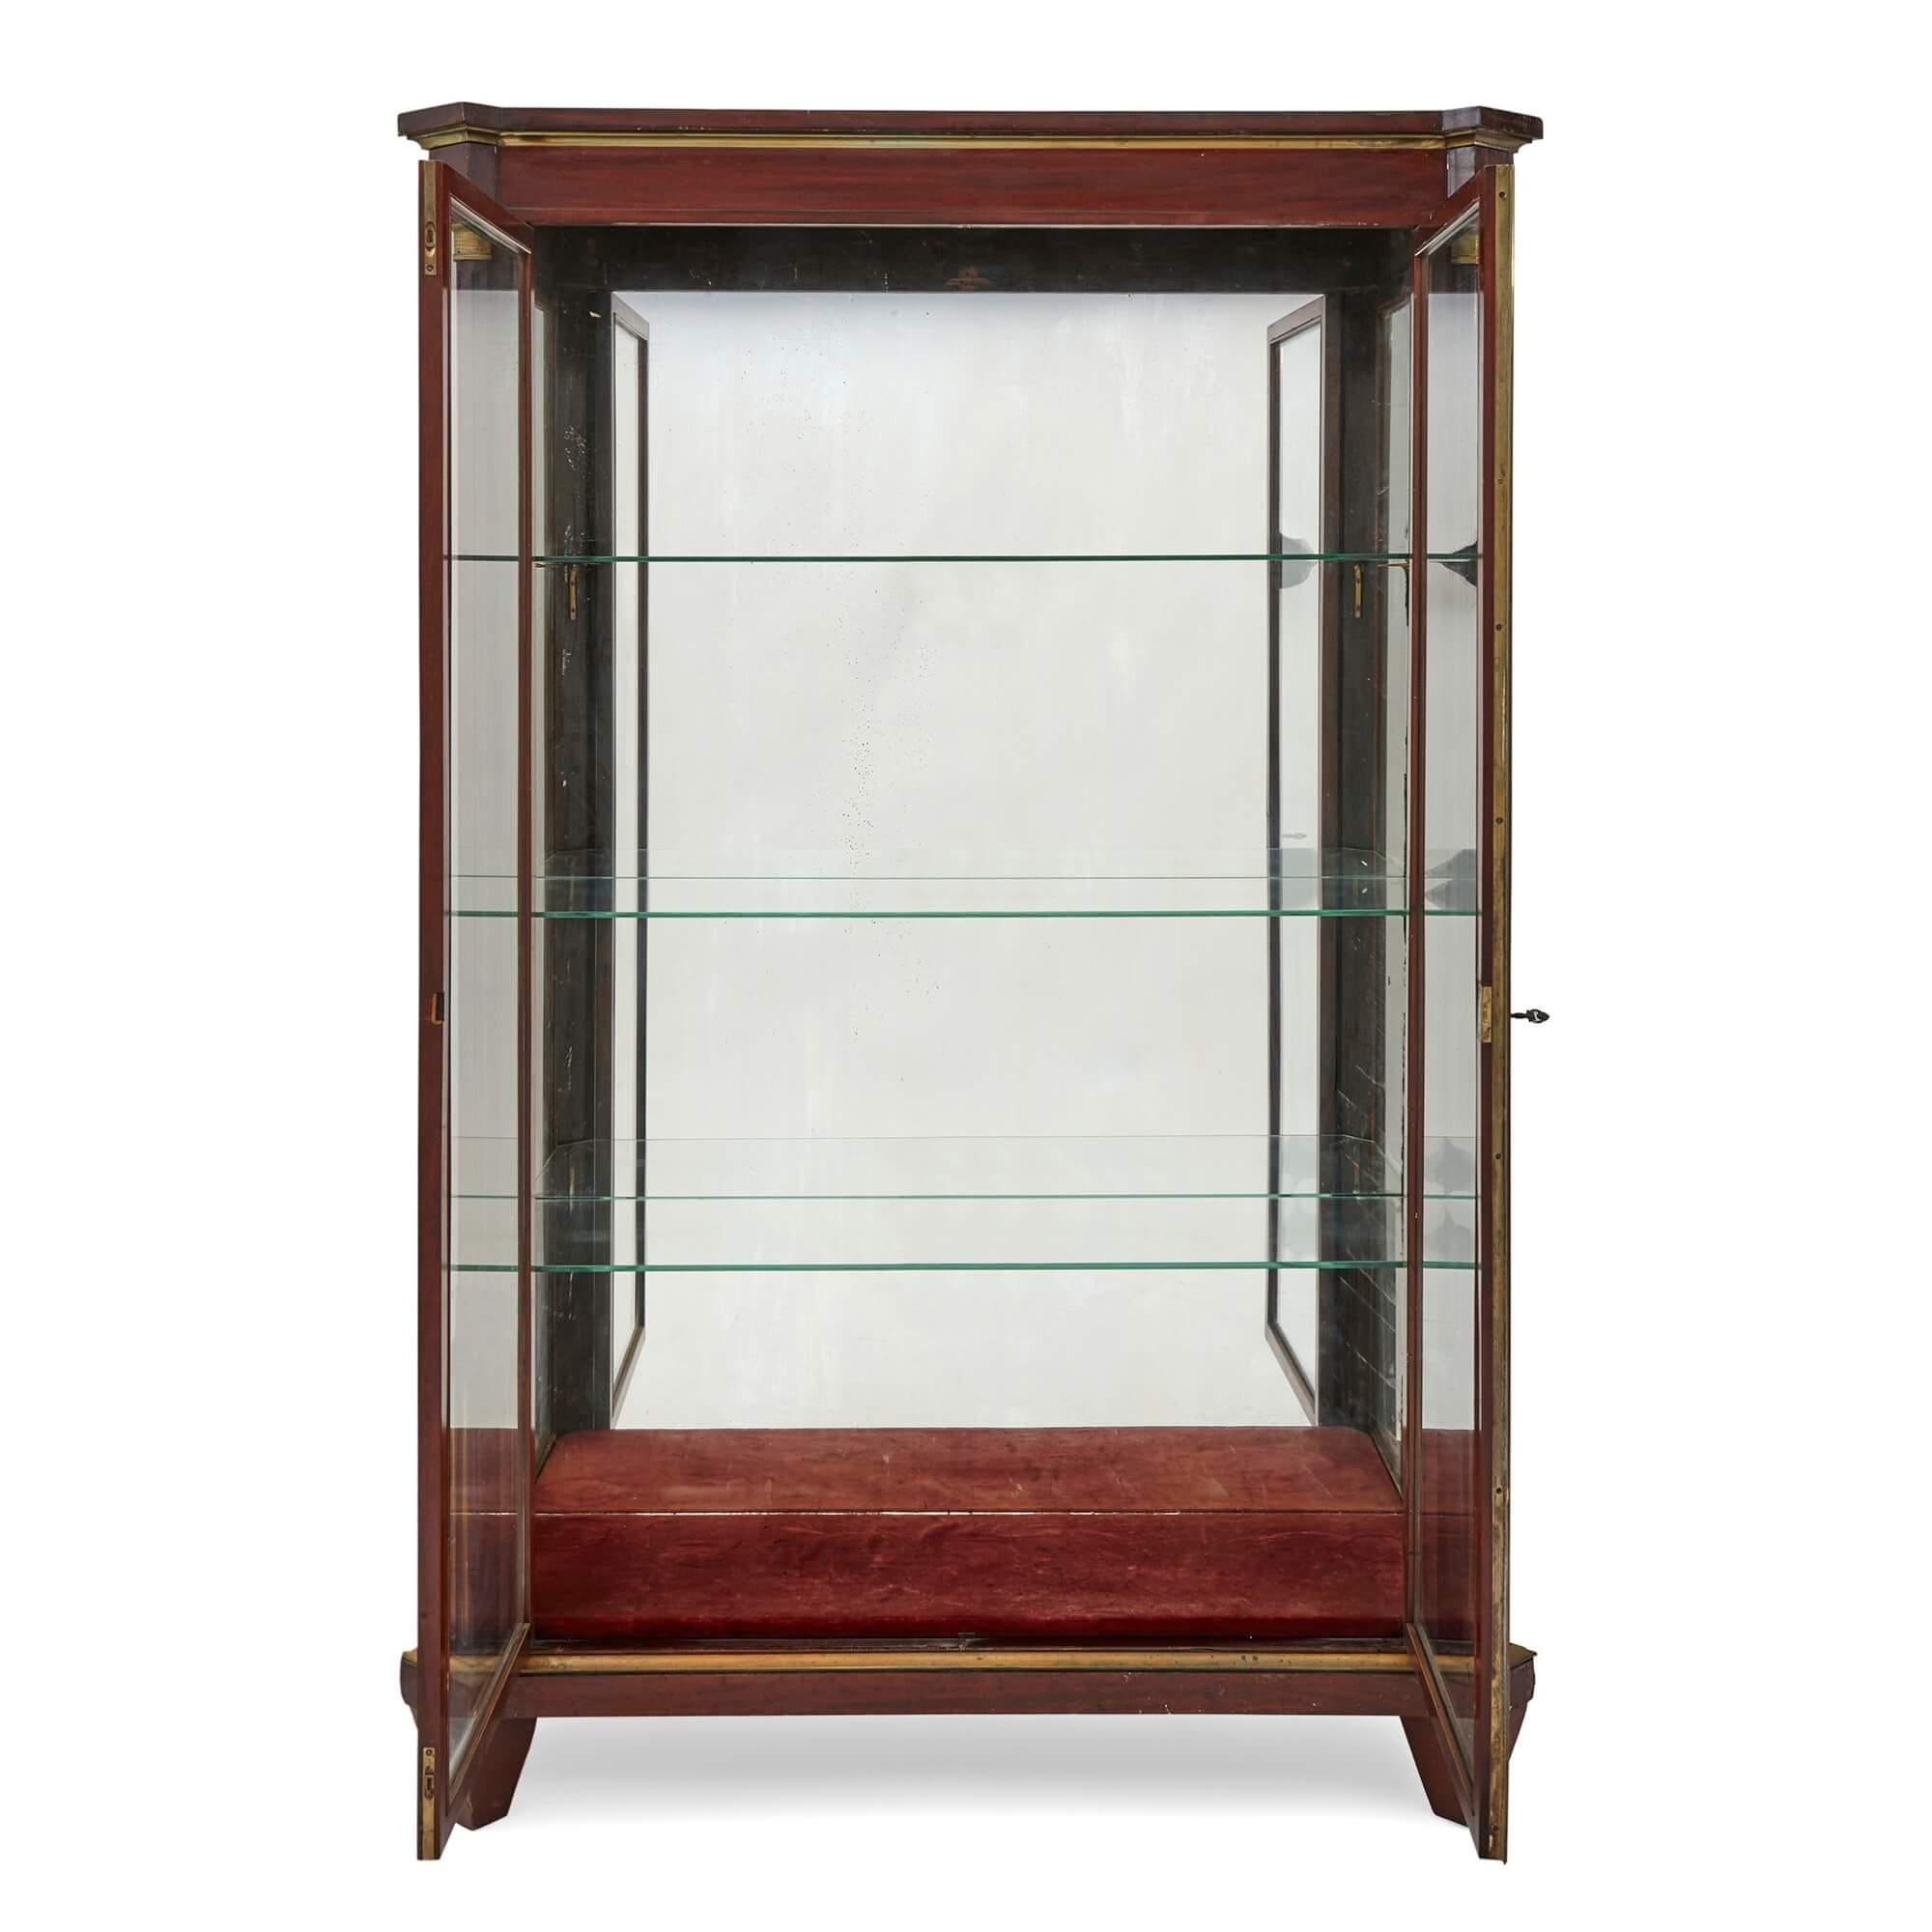 Large late 19th century french neoclassical gilt metal mounted vitrine
Measures: Height 184cm, width 121cm, depth 46cm

This excellent display cabinet is a large late nineteenth century vitrine, made in France, and features gilt metallic elements